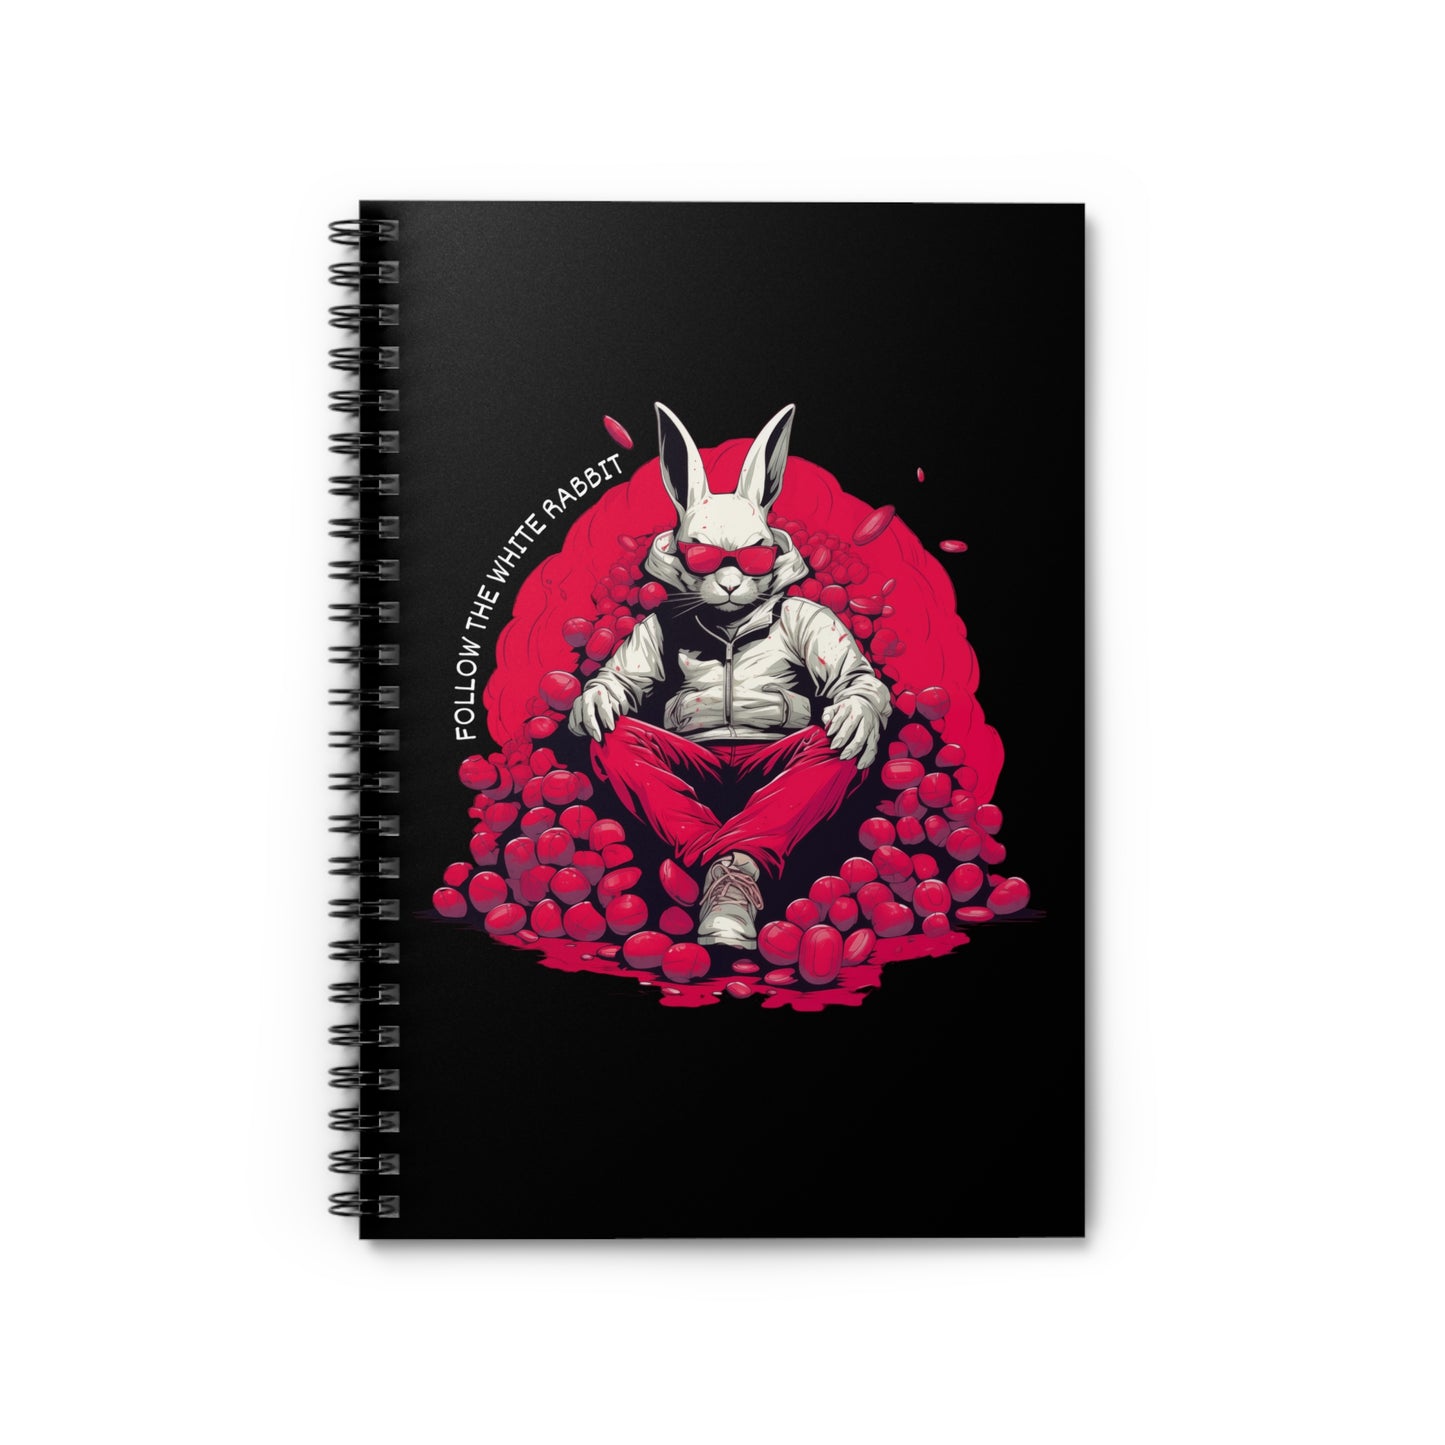 Follow The White Rabbit Signature Spiral Notebook - Ruled Line